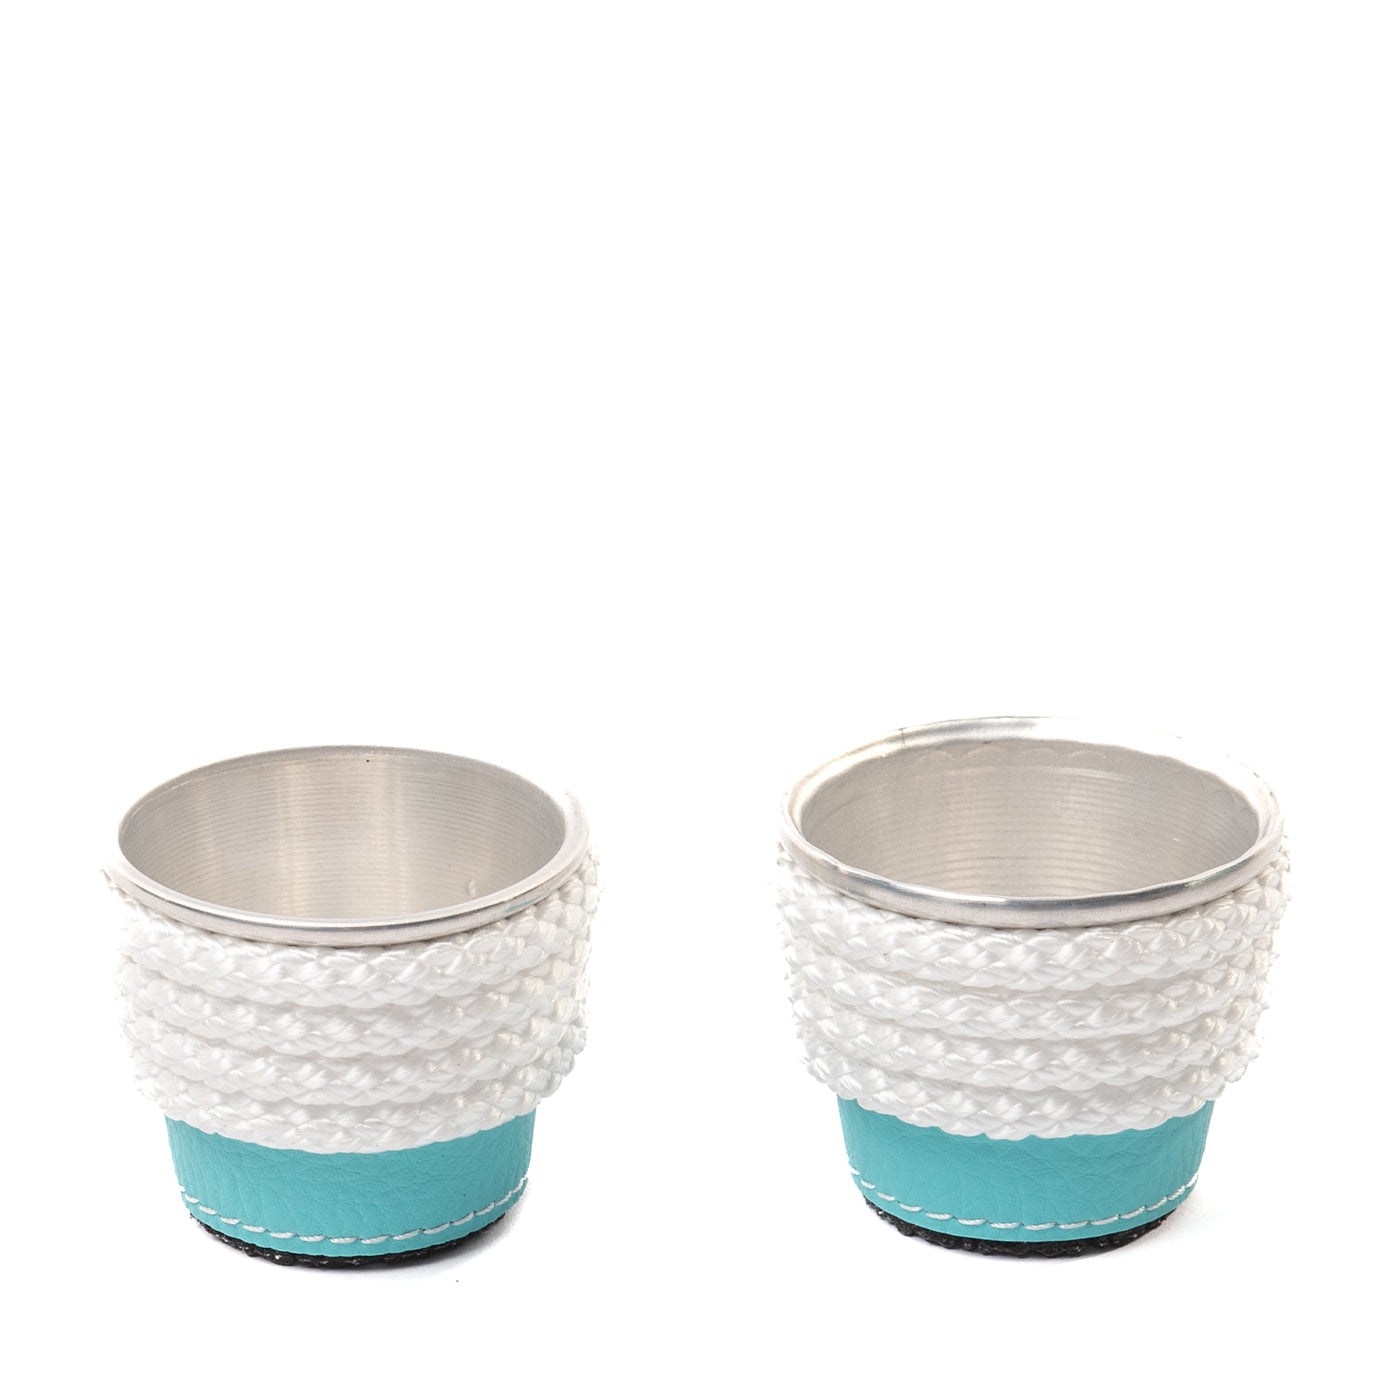 Turquoise & White Set of 6 Aluminum Paper Cup Holders - Alternative view 1